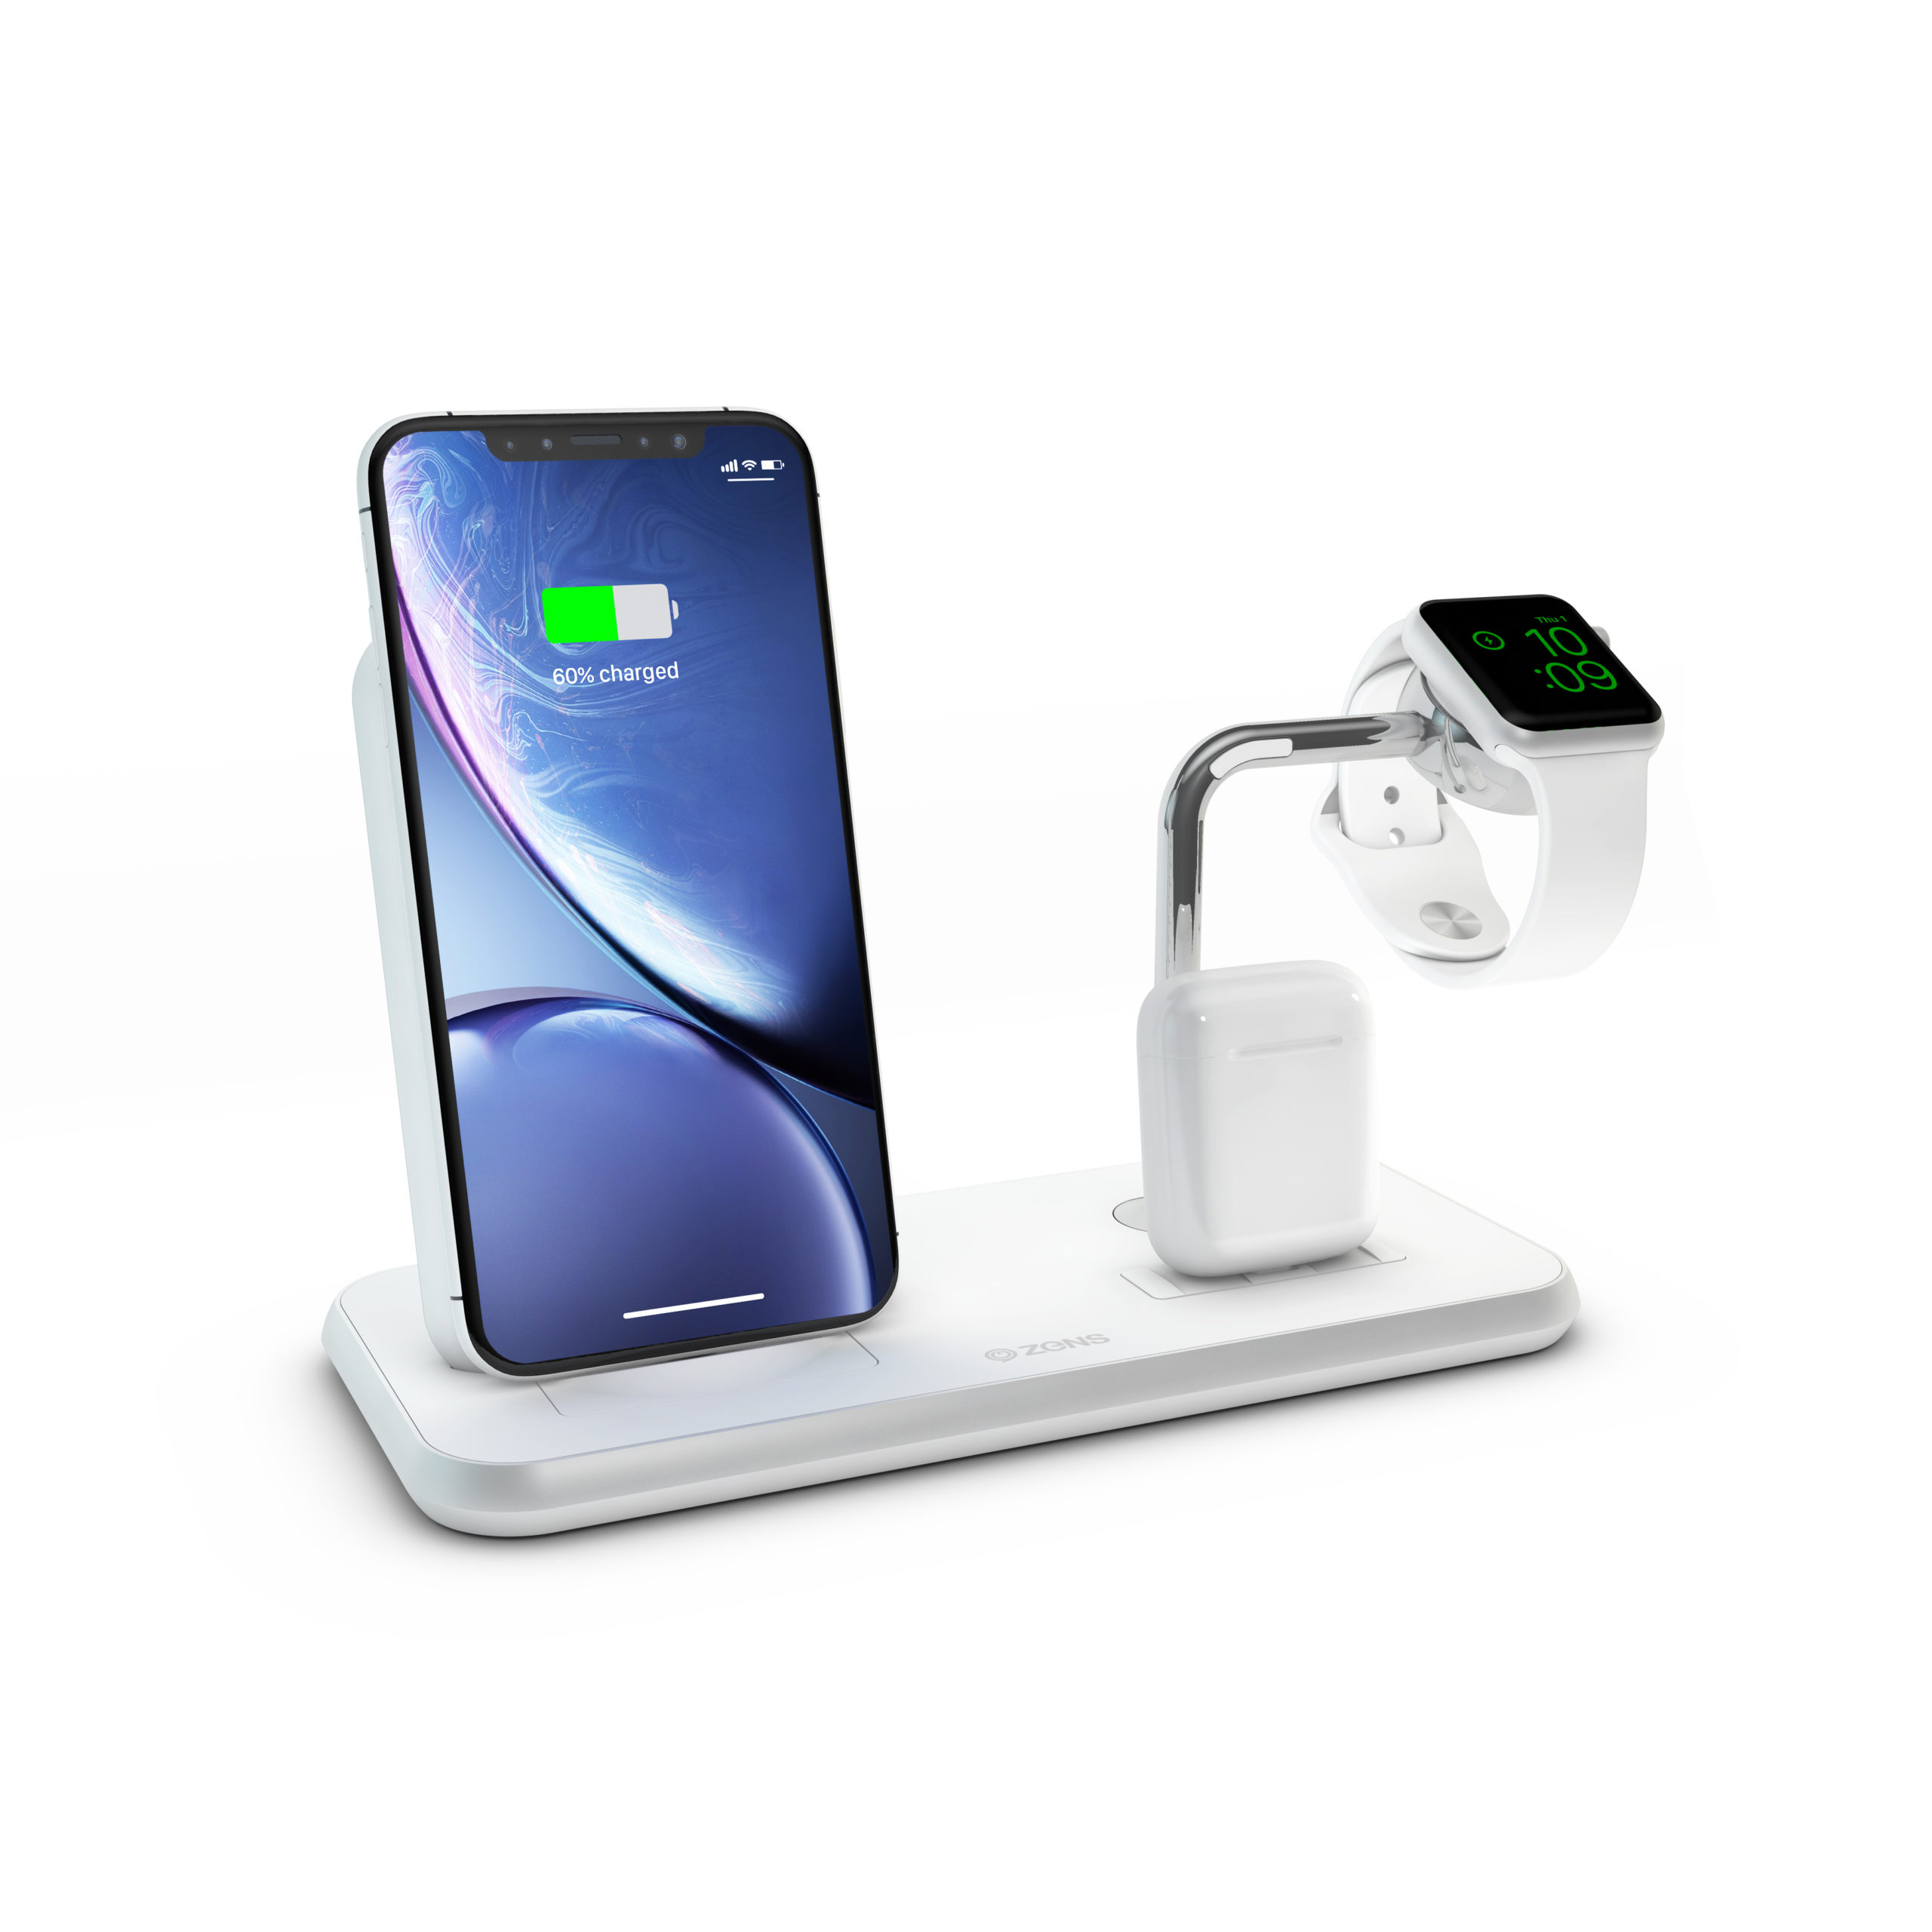 ZEDC07W ZENS StandDockWatch Aluminium Wireless Charger White with Apple Watch iPhone and AirPods